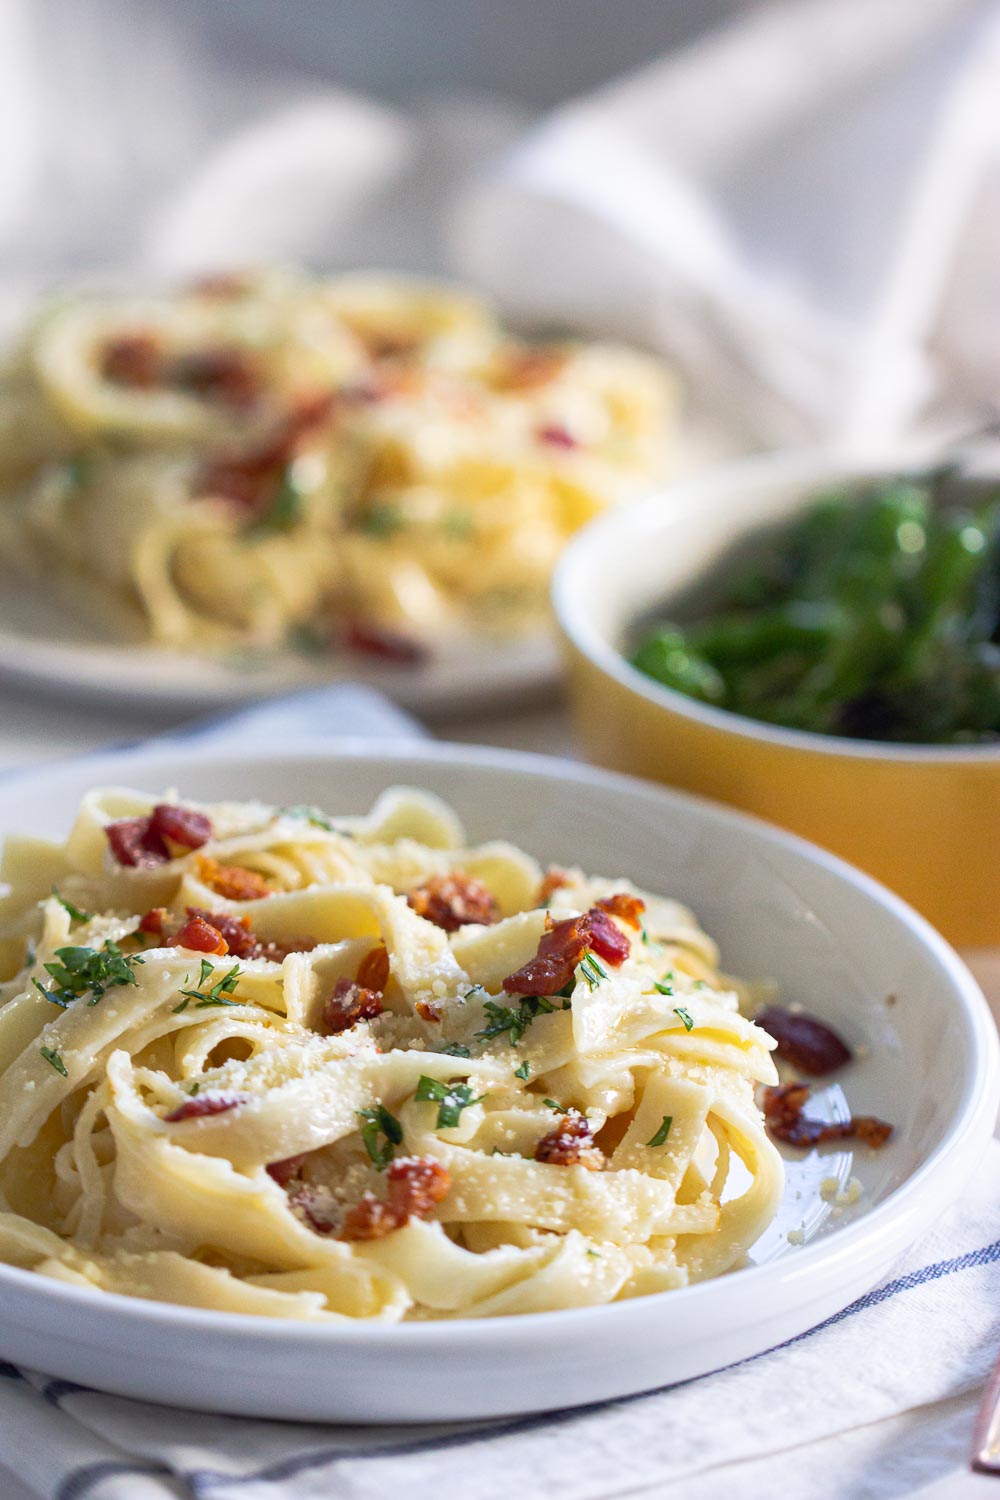 This creamy pear and mascarpone pasta get its kick from pear tossed in mascarpone cheese and crispy prosciutto. Ready on the table in 15 minutes and it's perfect for a quick weeknight recipe.